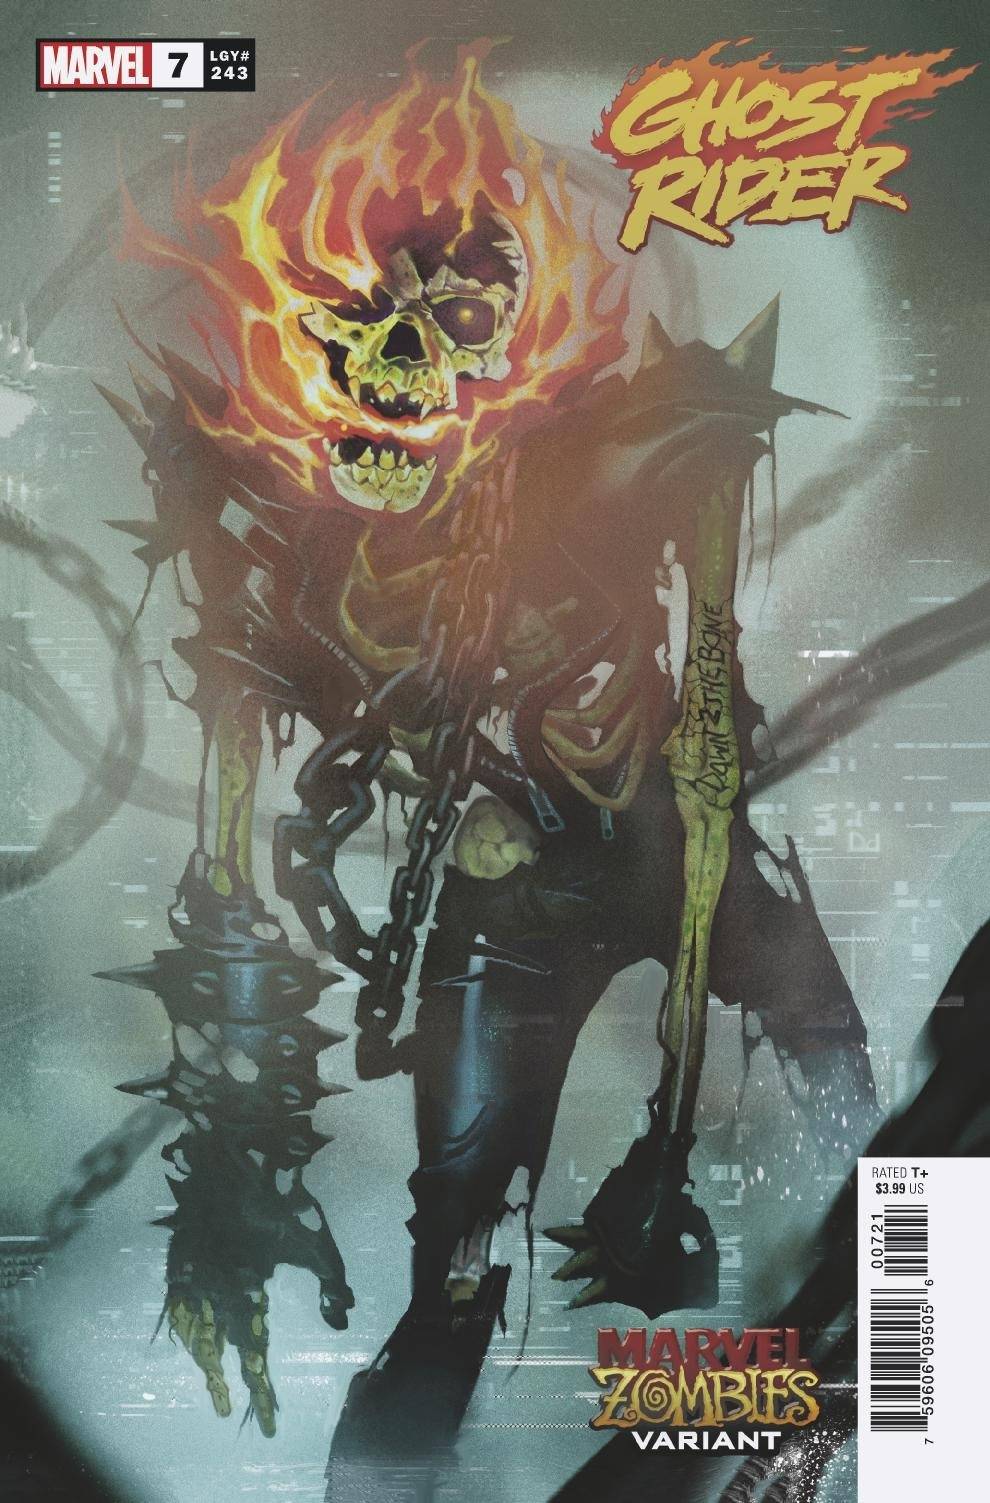 GHOST RIDER #7 MARVEL ZOMBIES VARIANT 2020